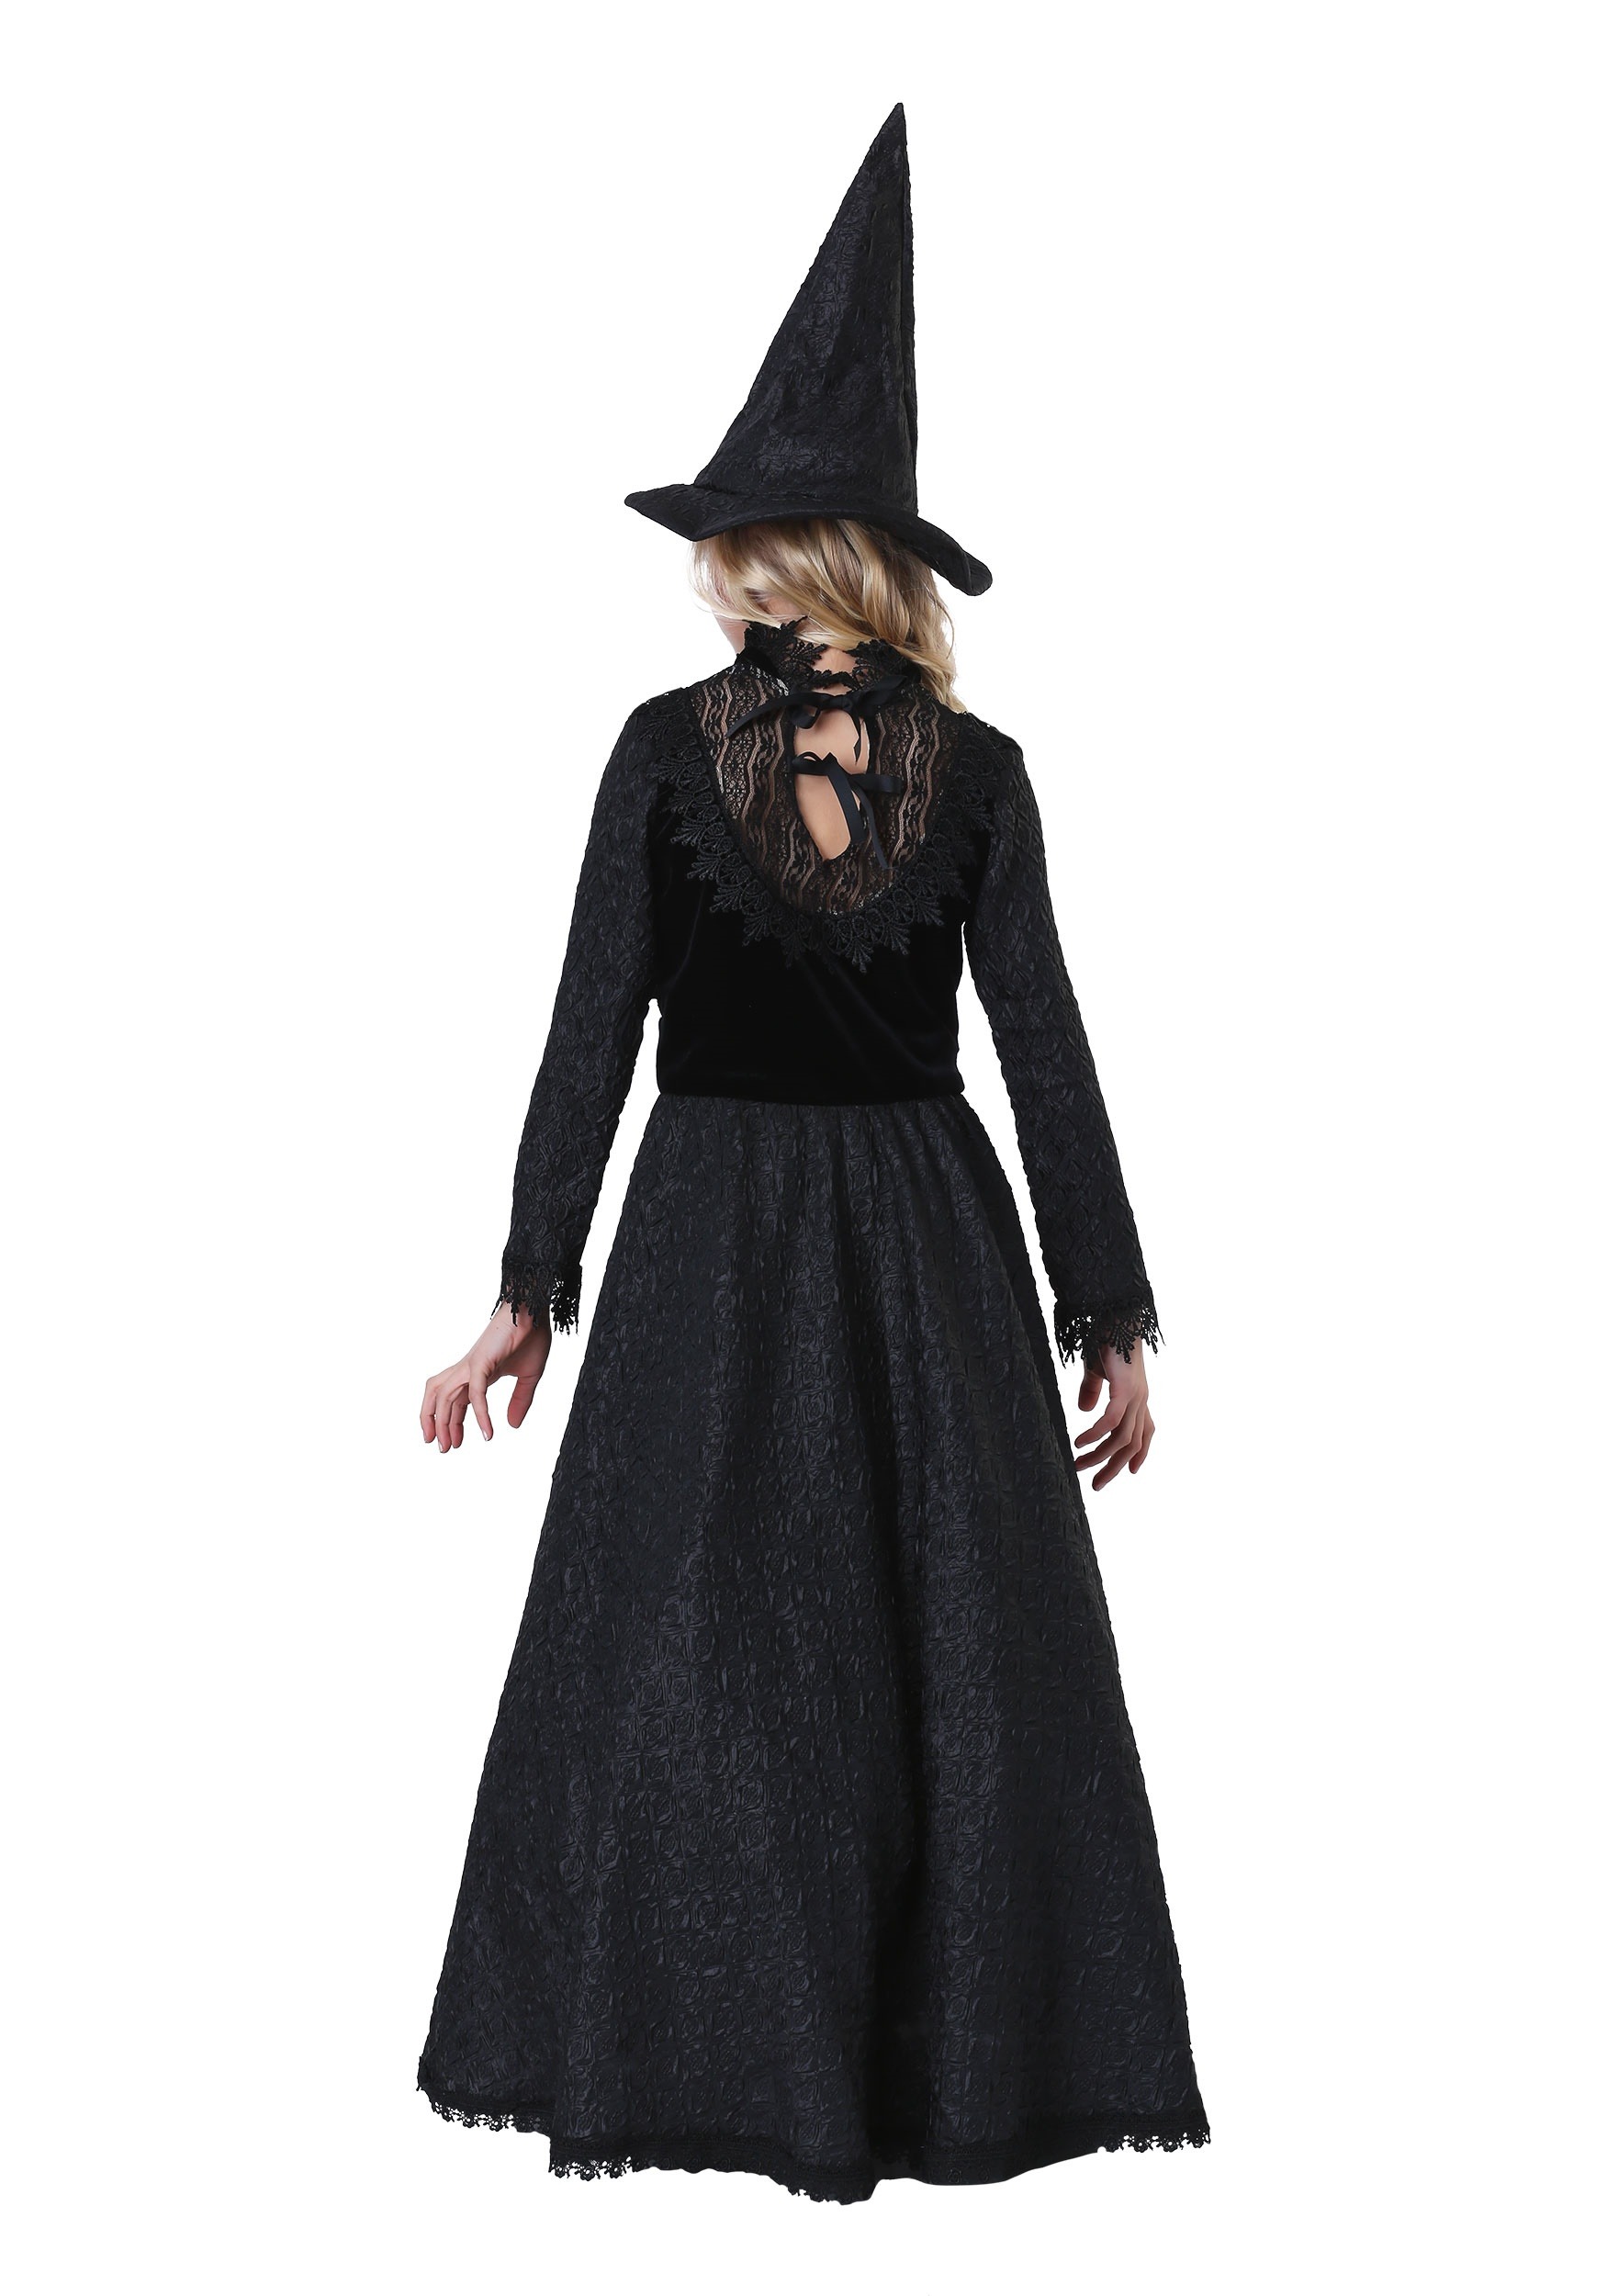 Witches Hat Black Adults Halloween Tall 43cm Fancy Dress Accessory 